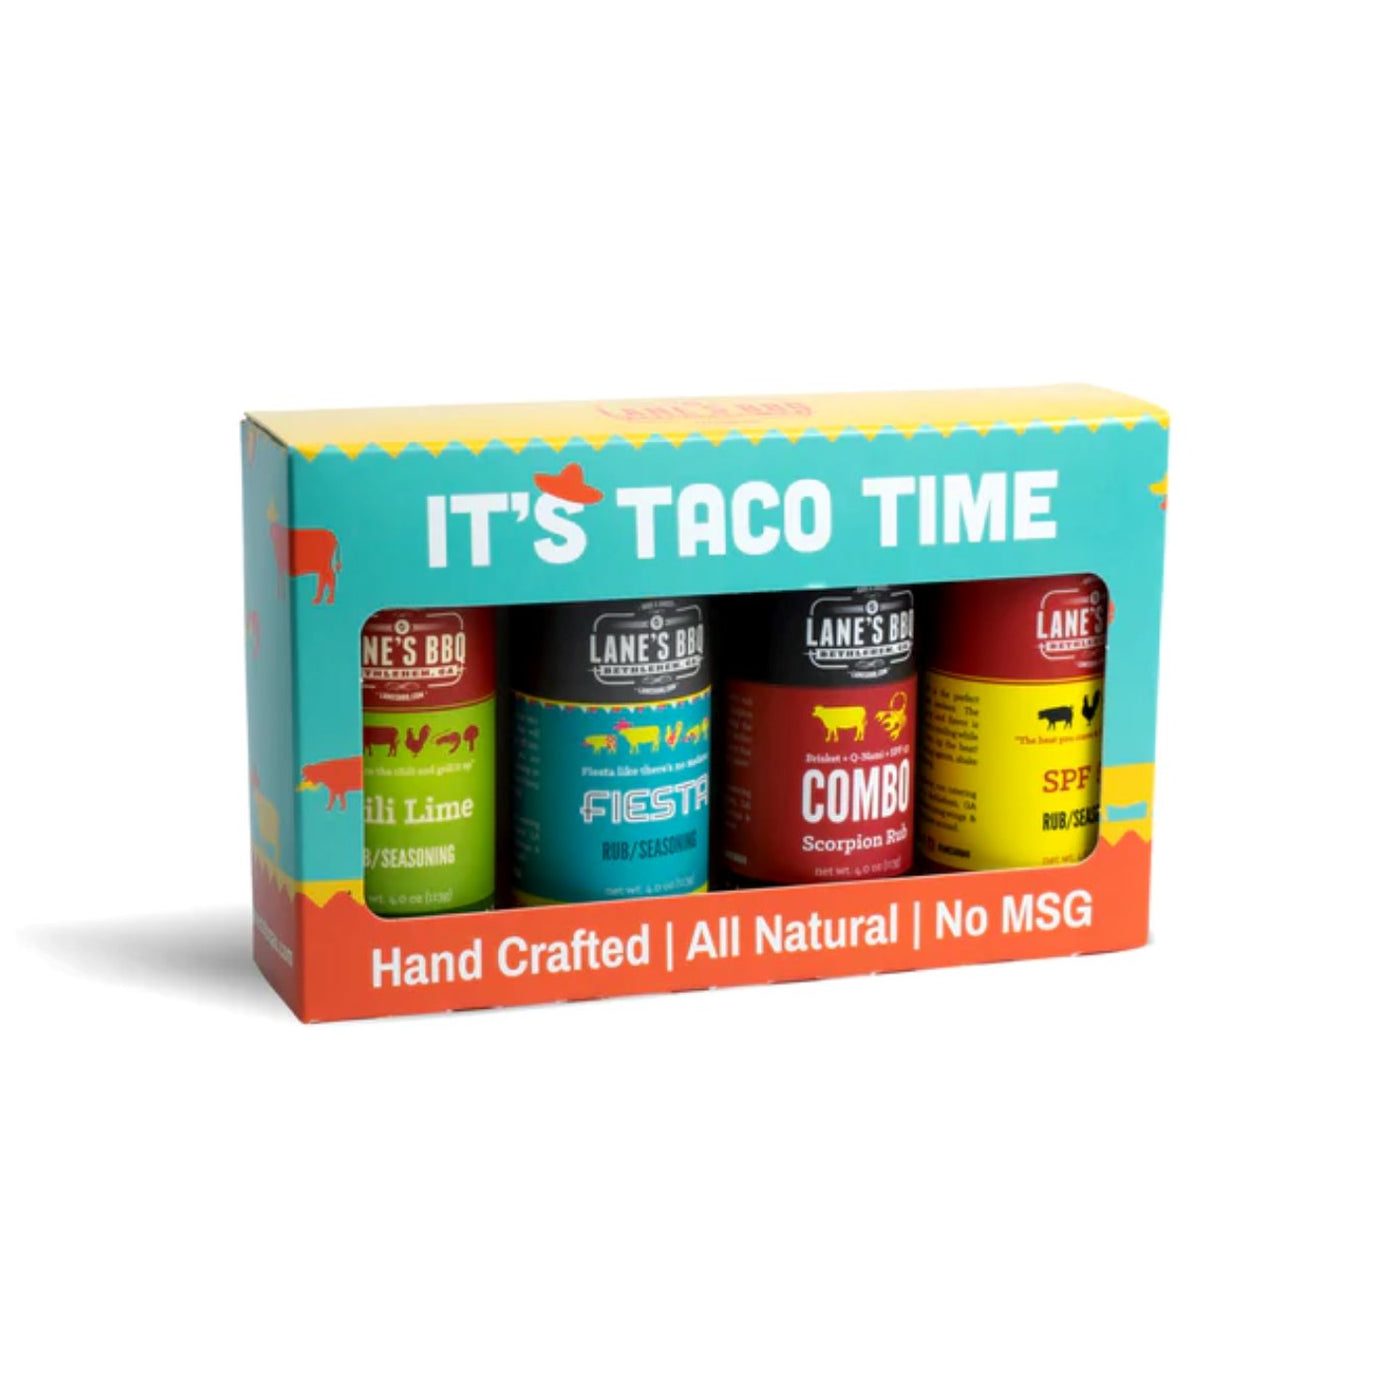 Lane's "It's Taco Time" 4 Rub Gift Pack